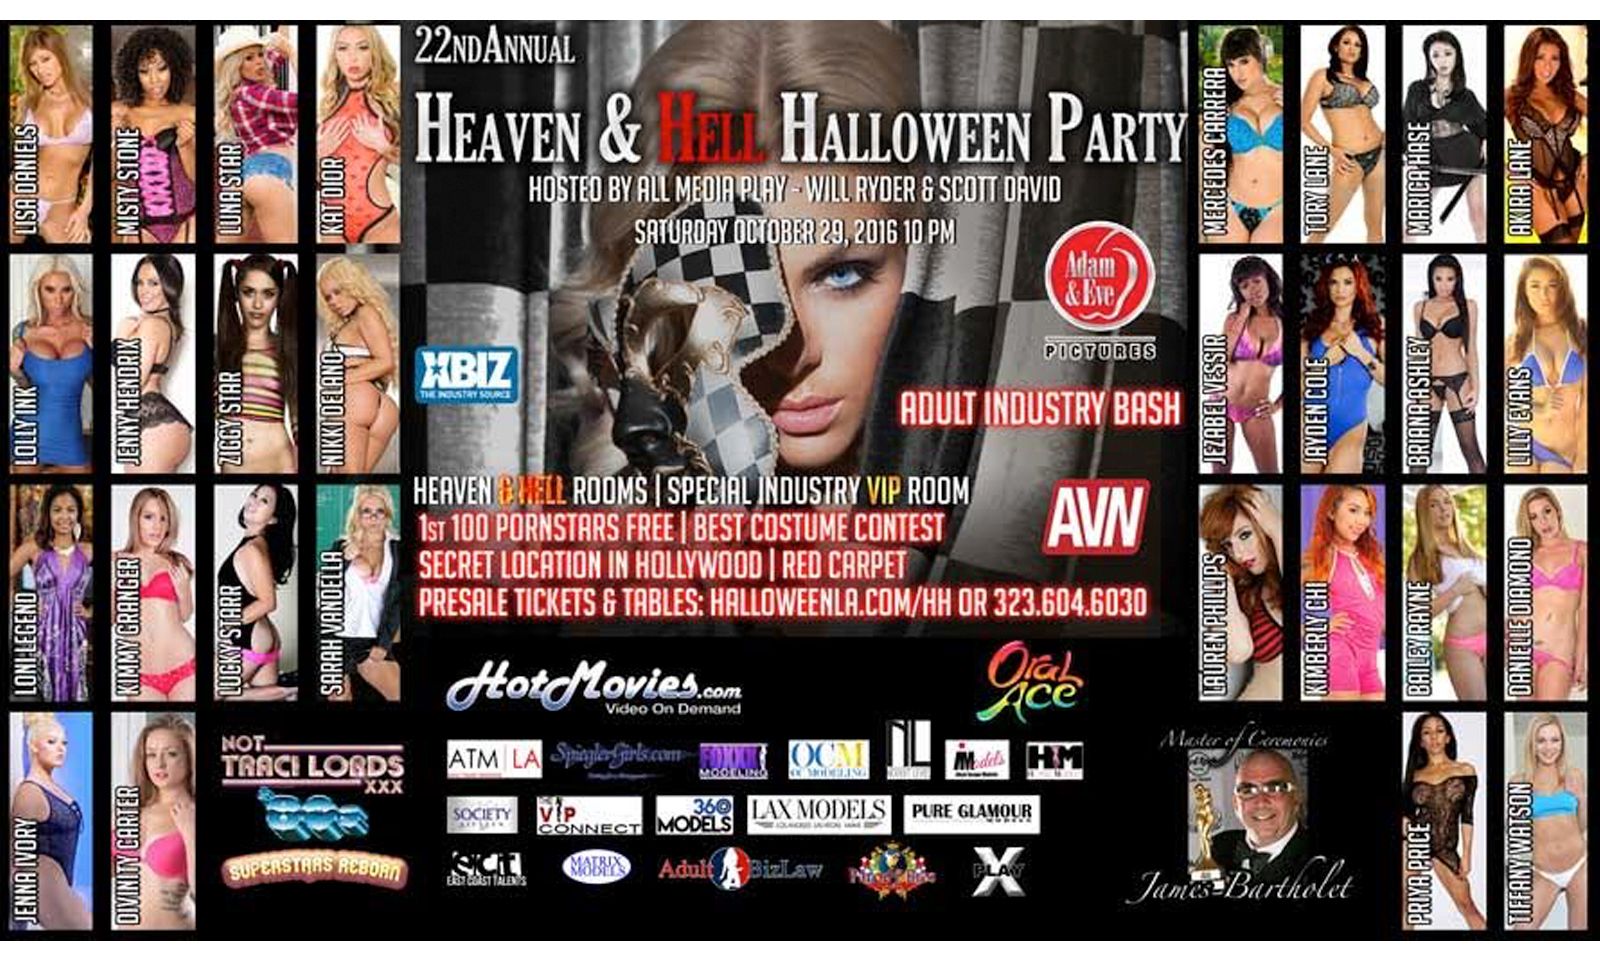 Annual Heaven & Hell Party Set For Secret Location on Oct. 29